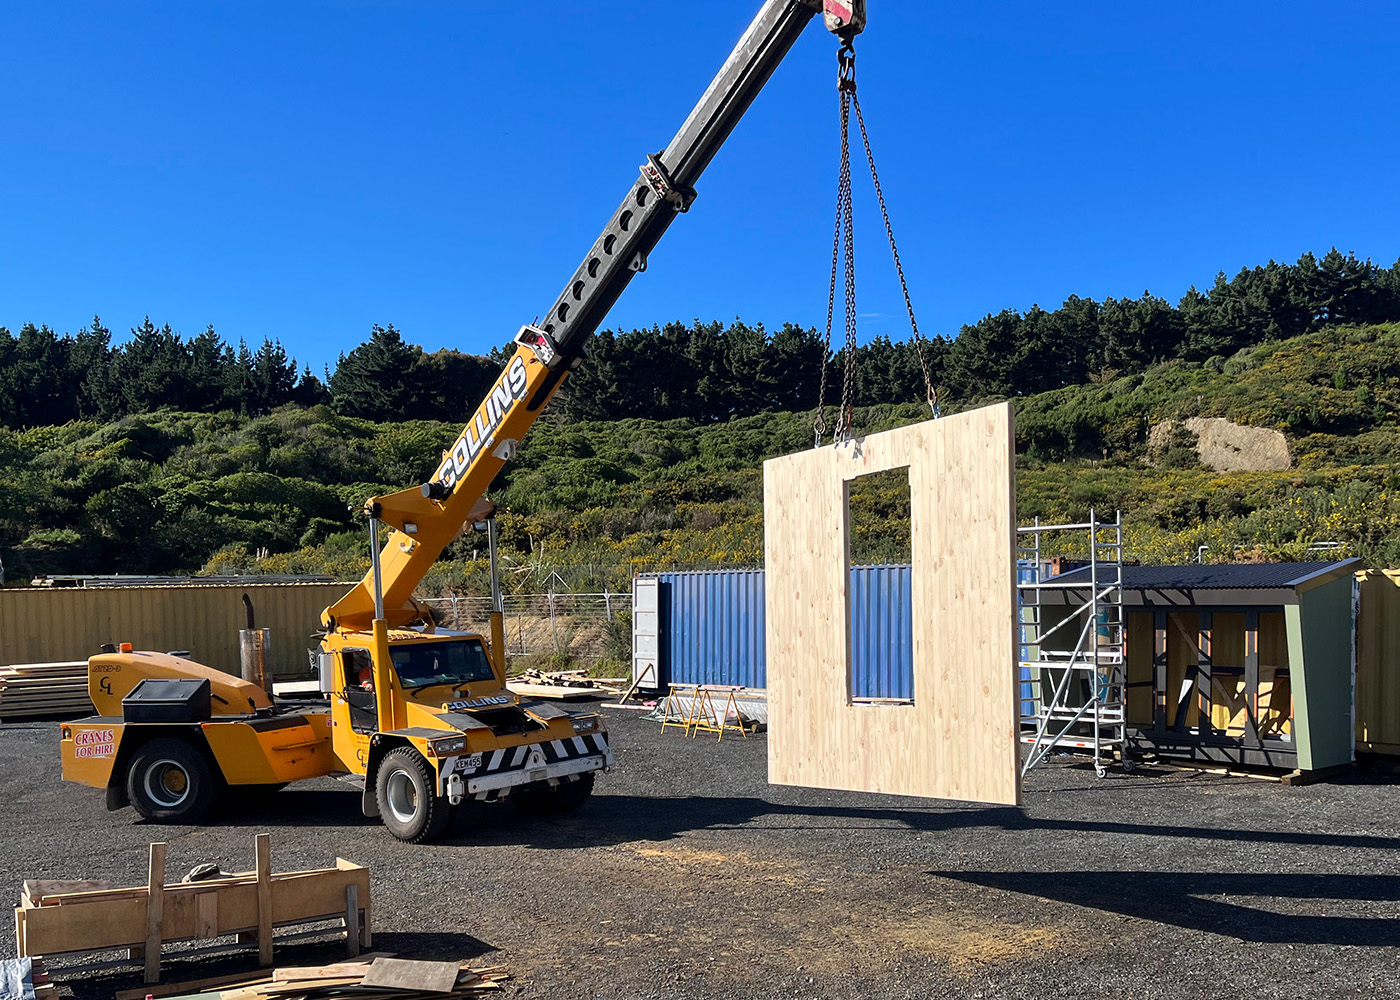 Crane lifting panel into place for Te Whare-iti module at assembly site in Porirua.